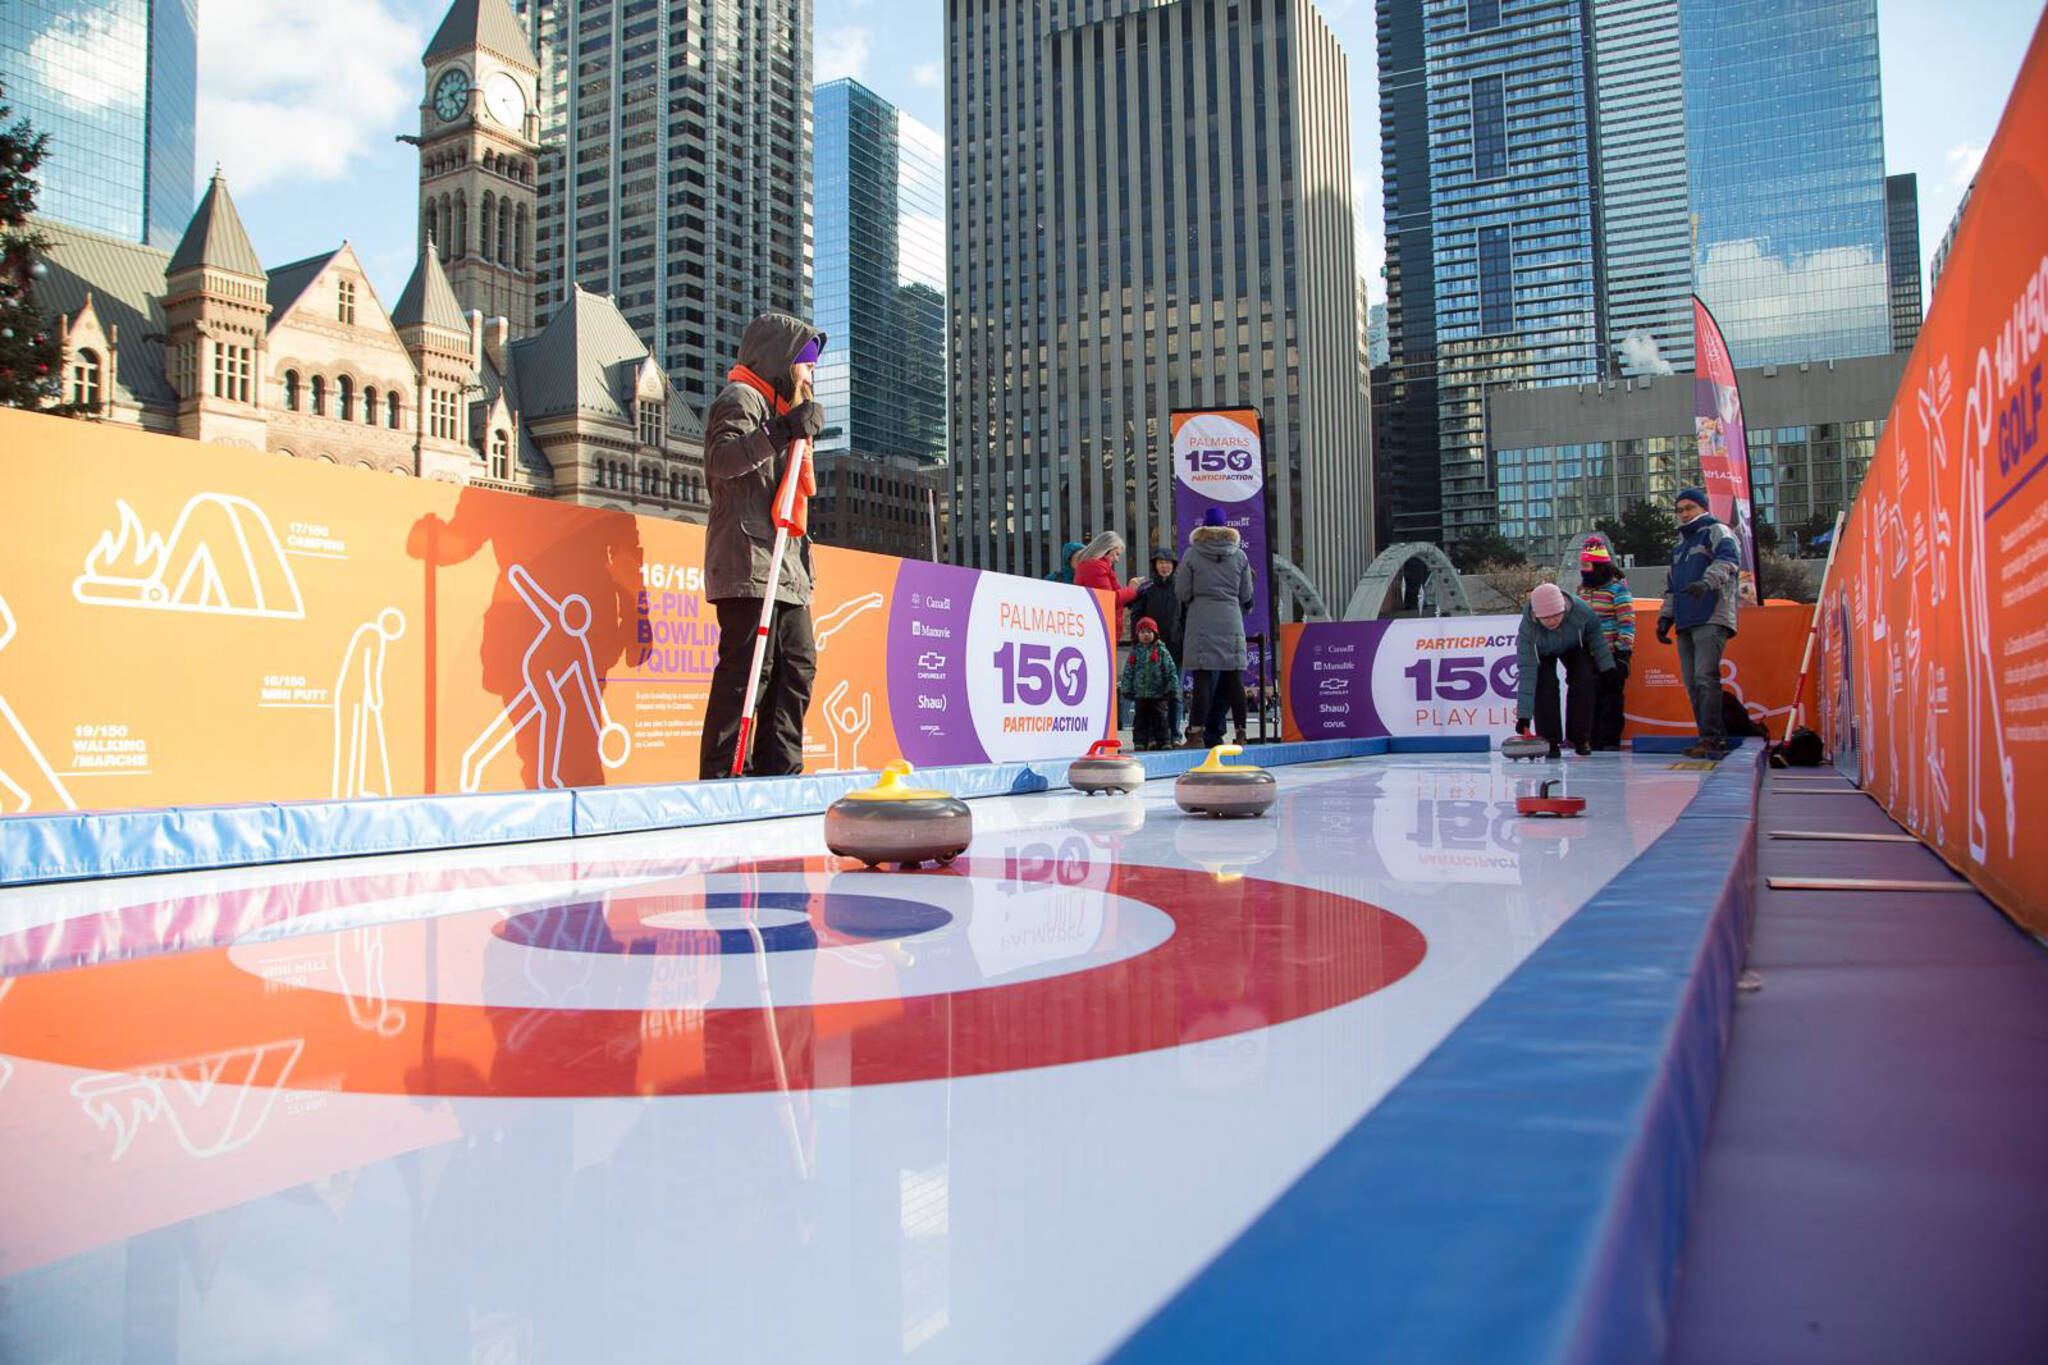 curling at Nathan Phillips Square